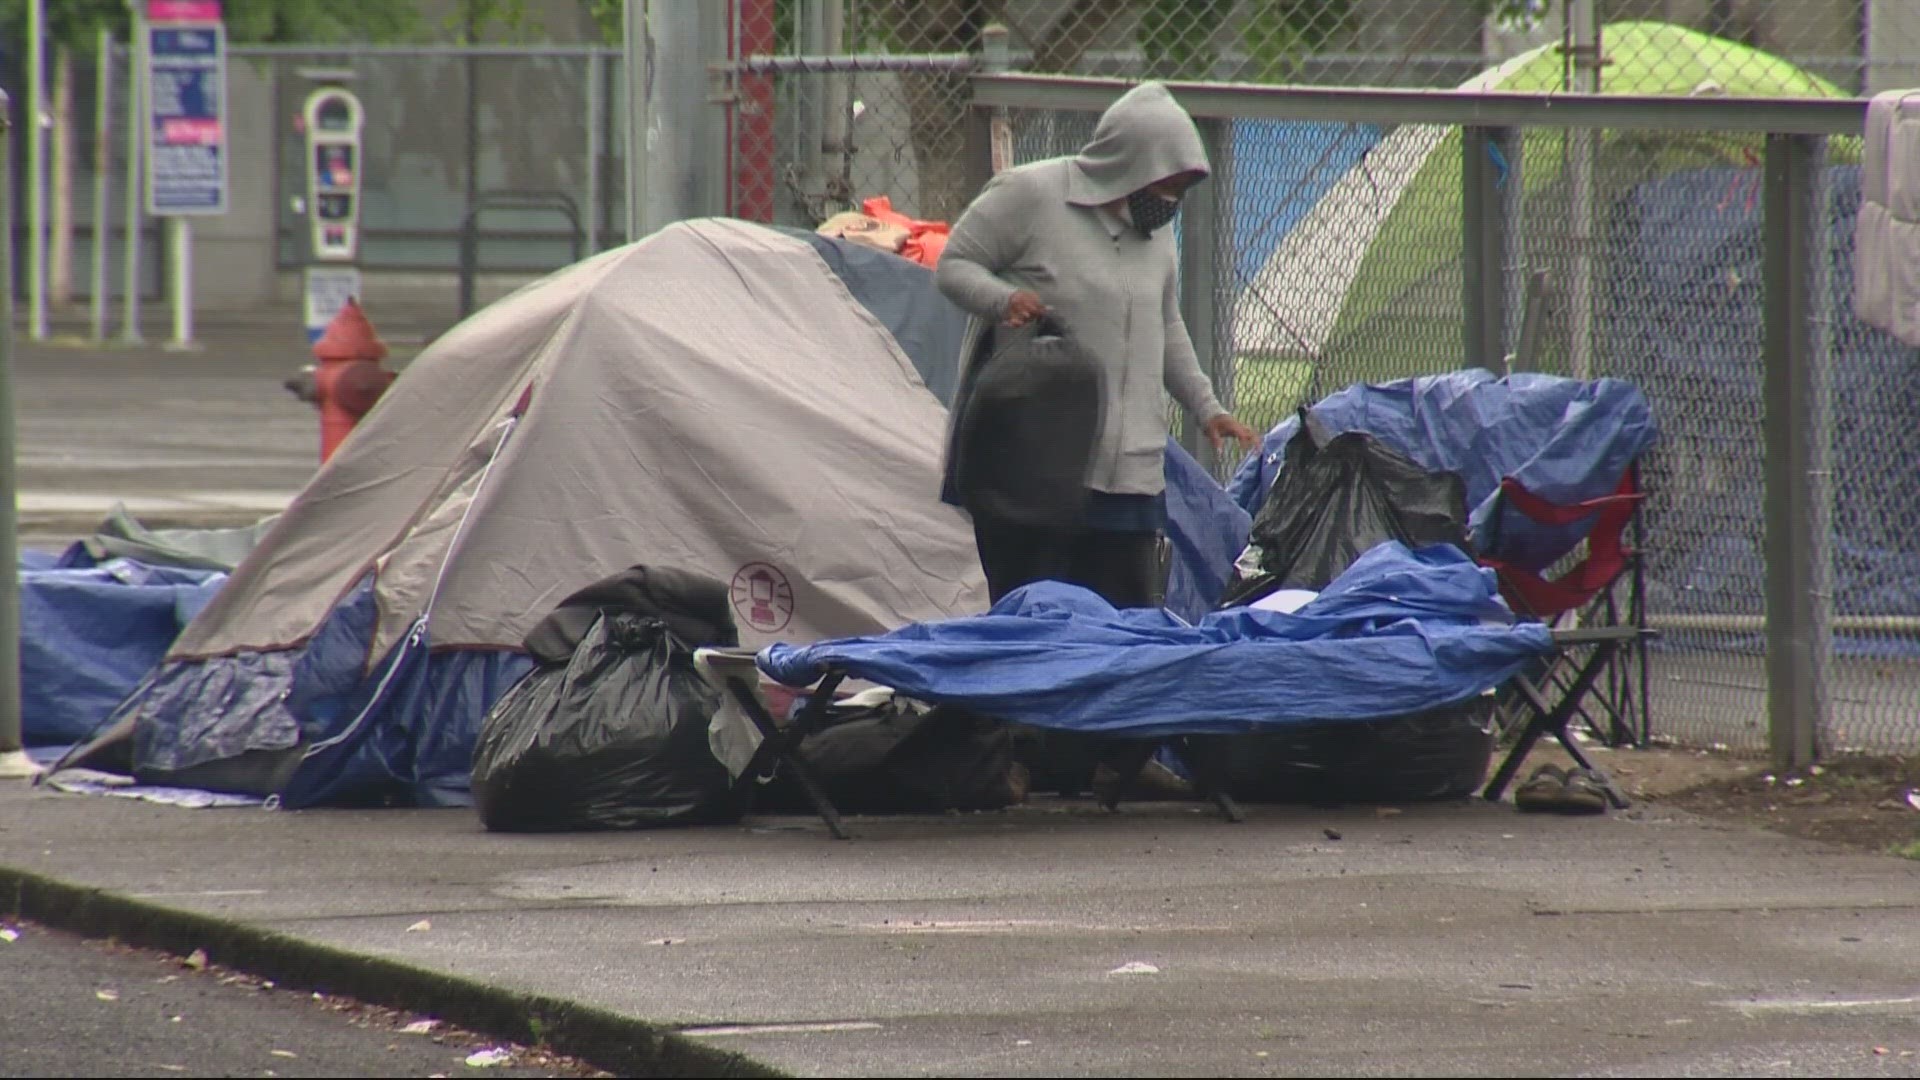 While the daytime ban began Friday, city officials said enforcement will be slowly phased in. Homeless people are already bracing themselves.